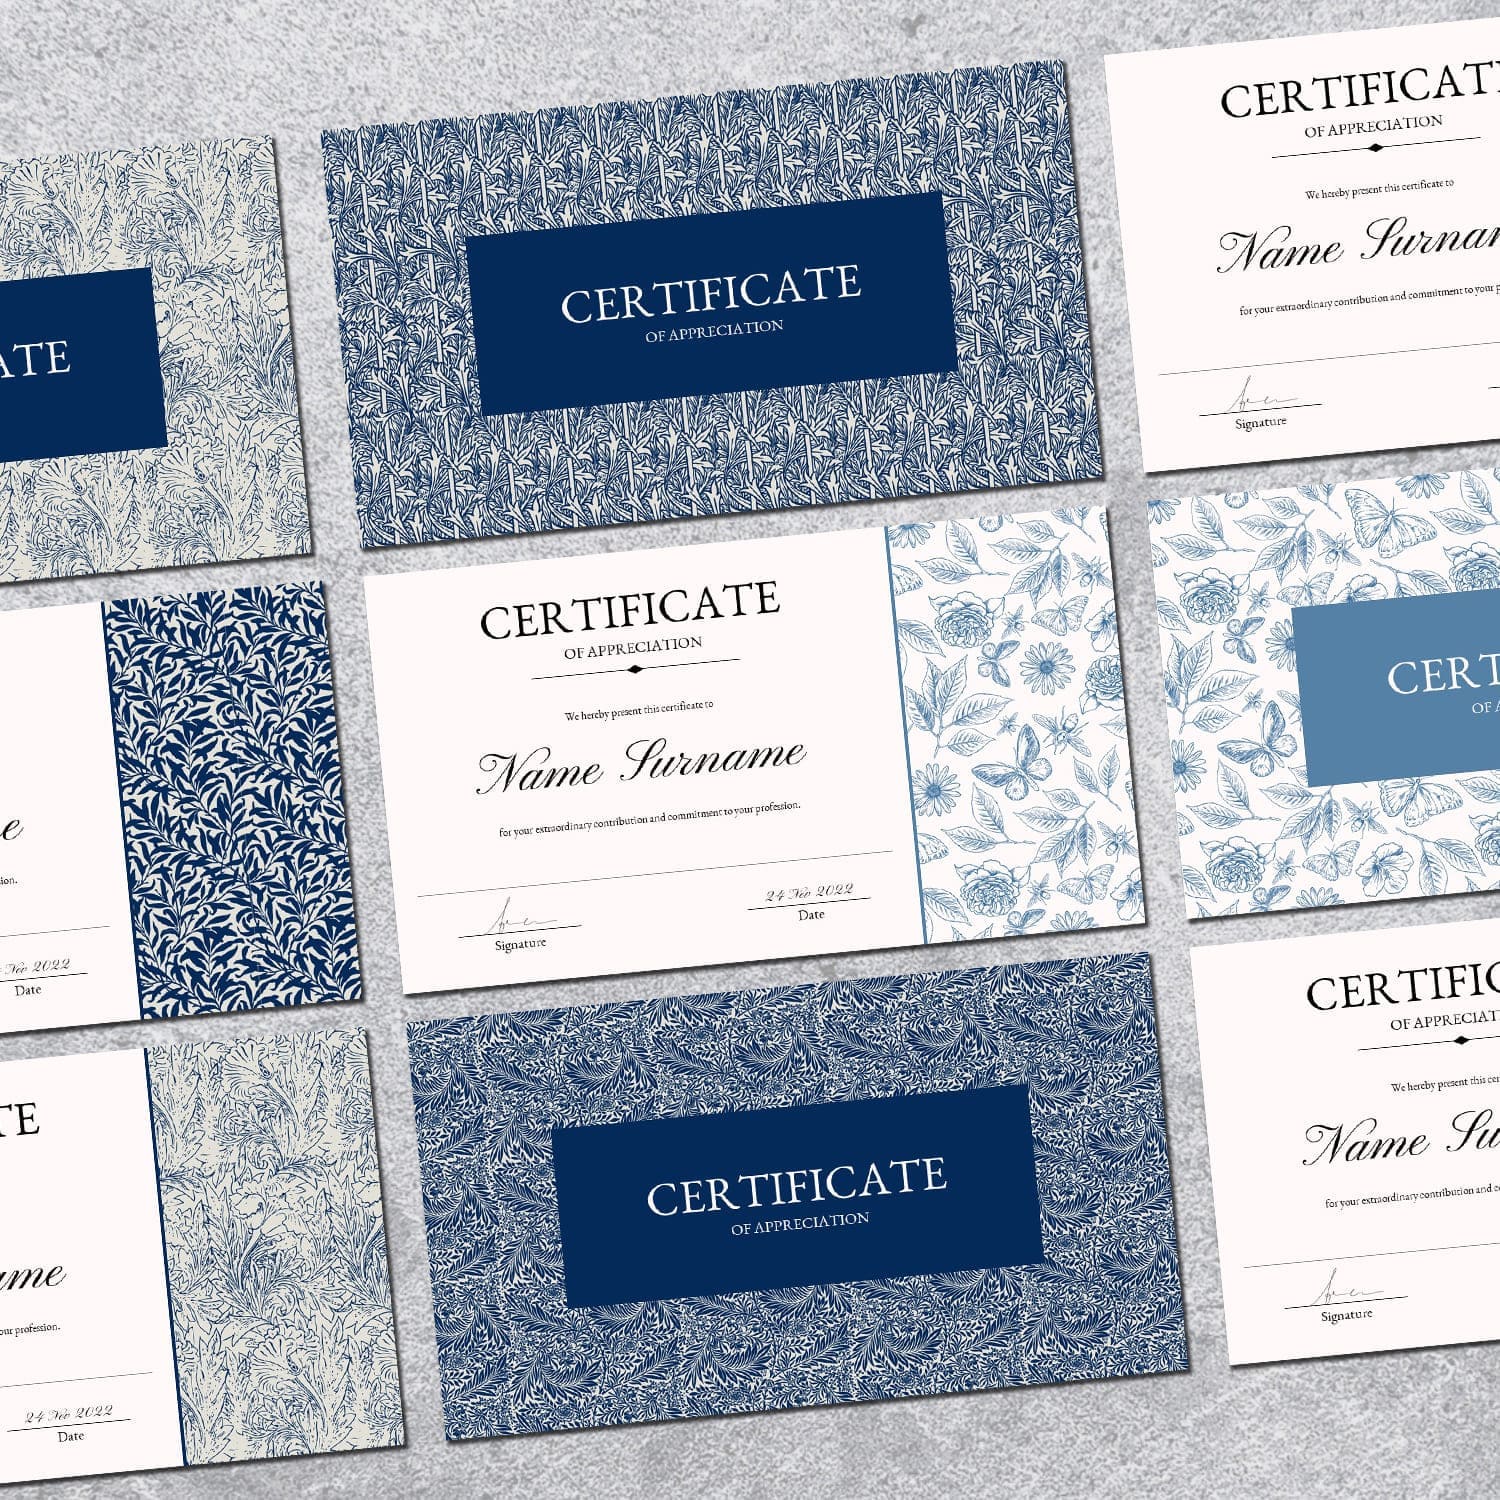 Certificate of appreciation powerpoint template, main picture 1500x1500.